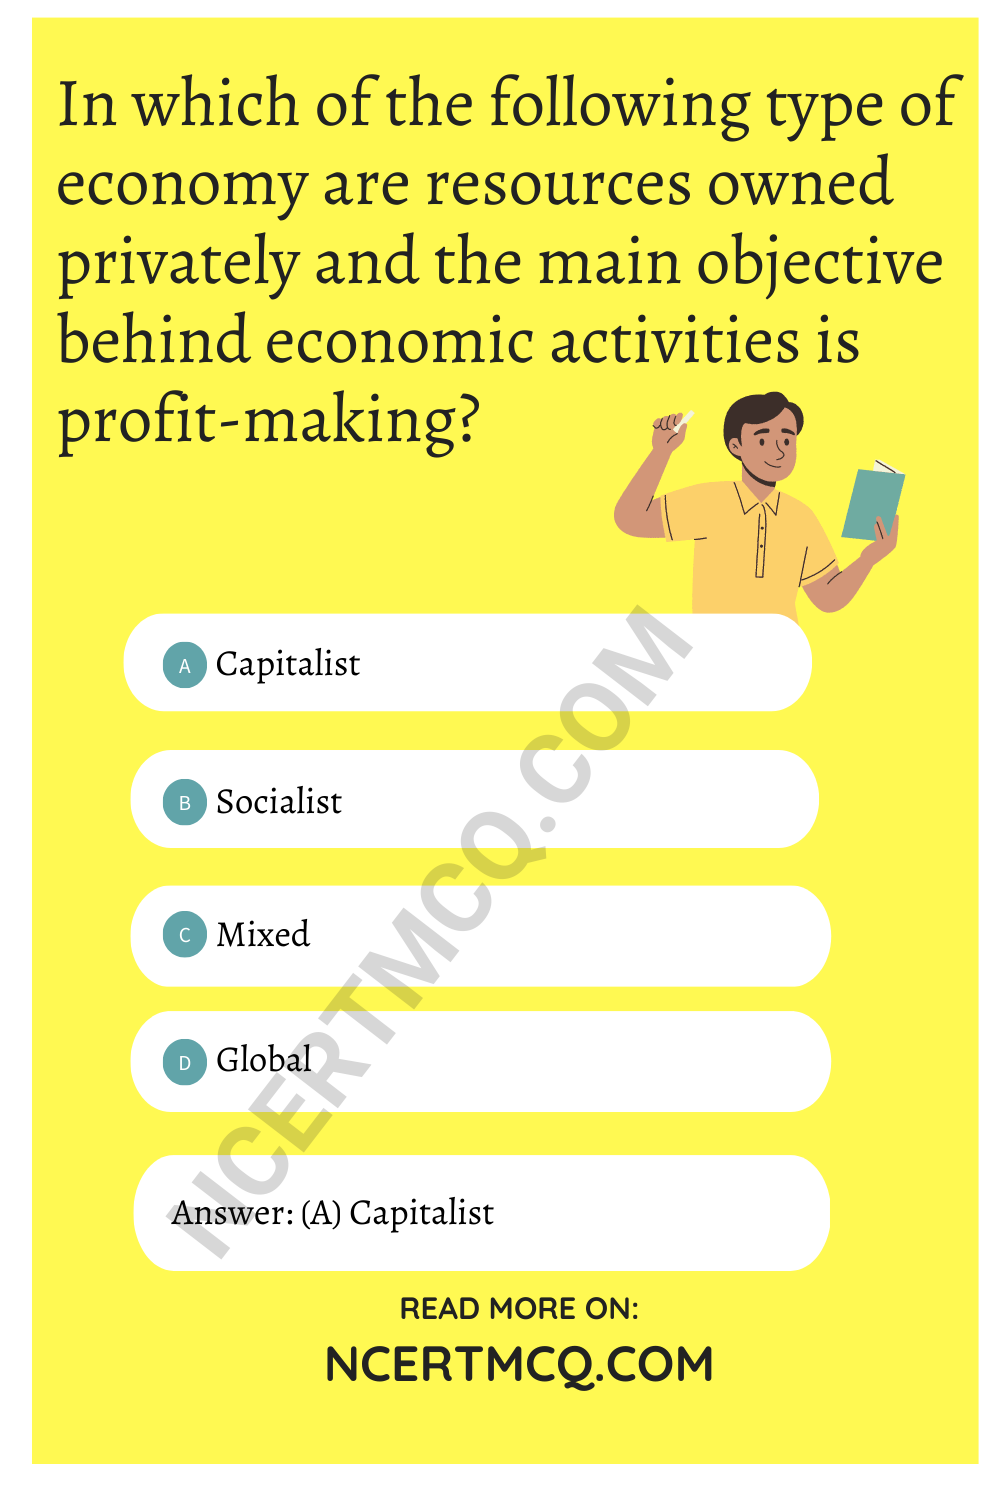 In which of the following type of economy are resources owned privately and the main objective behind economic activities is profit-making?